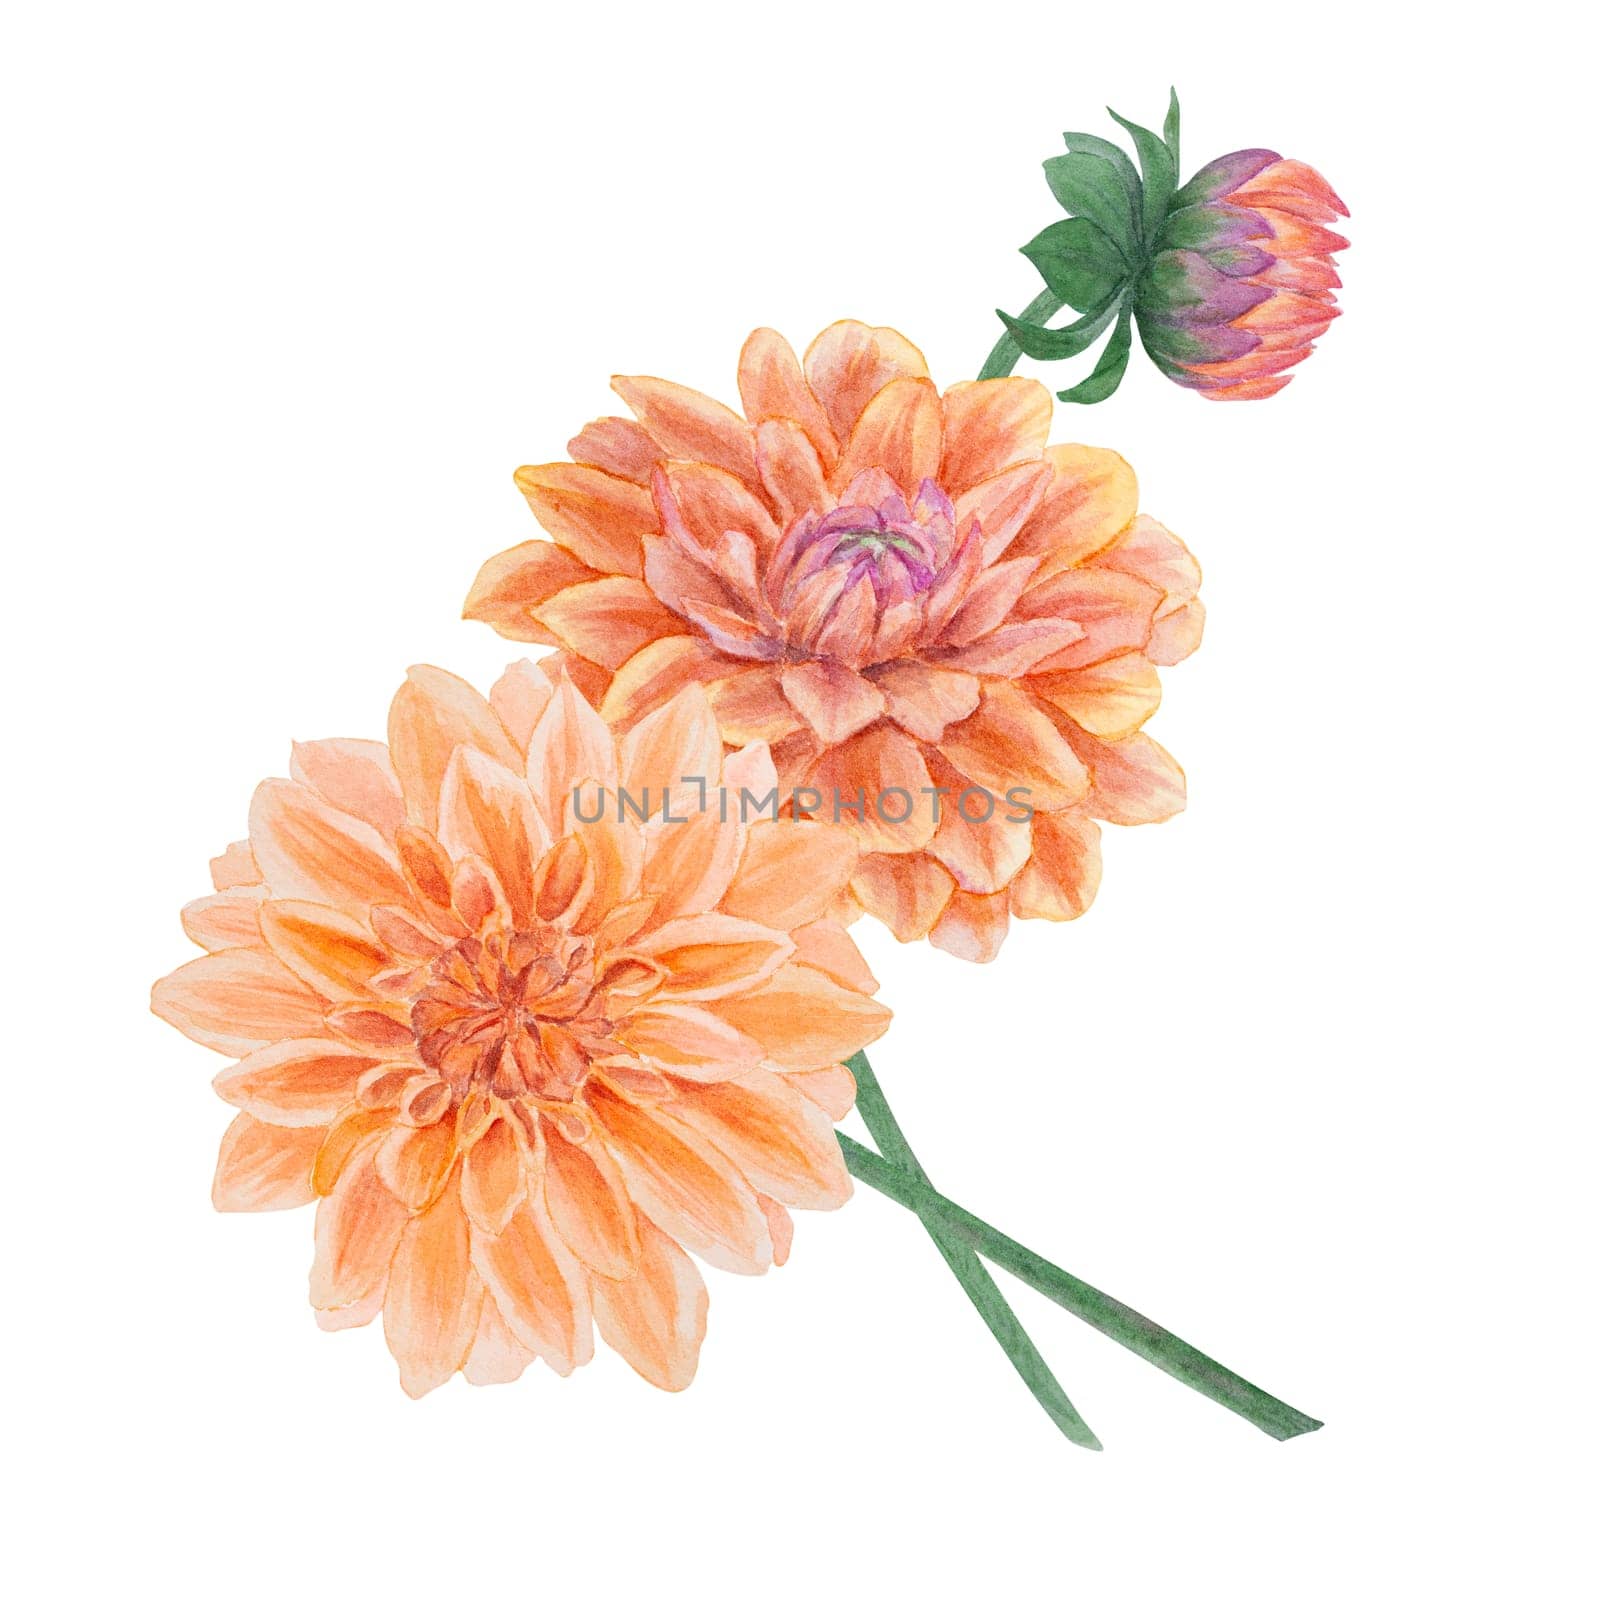 Garden orange dahlia watercolor illustration. Hand drawn botanical painting, floral sketch. Colorful flower clipart for summer or autumn design of wedding invitation, prints, greetings, sublimation, textile